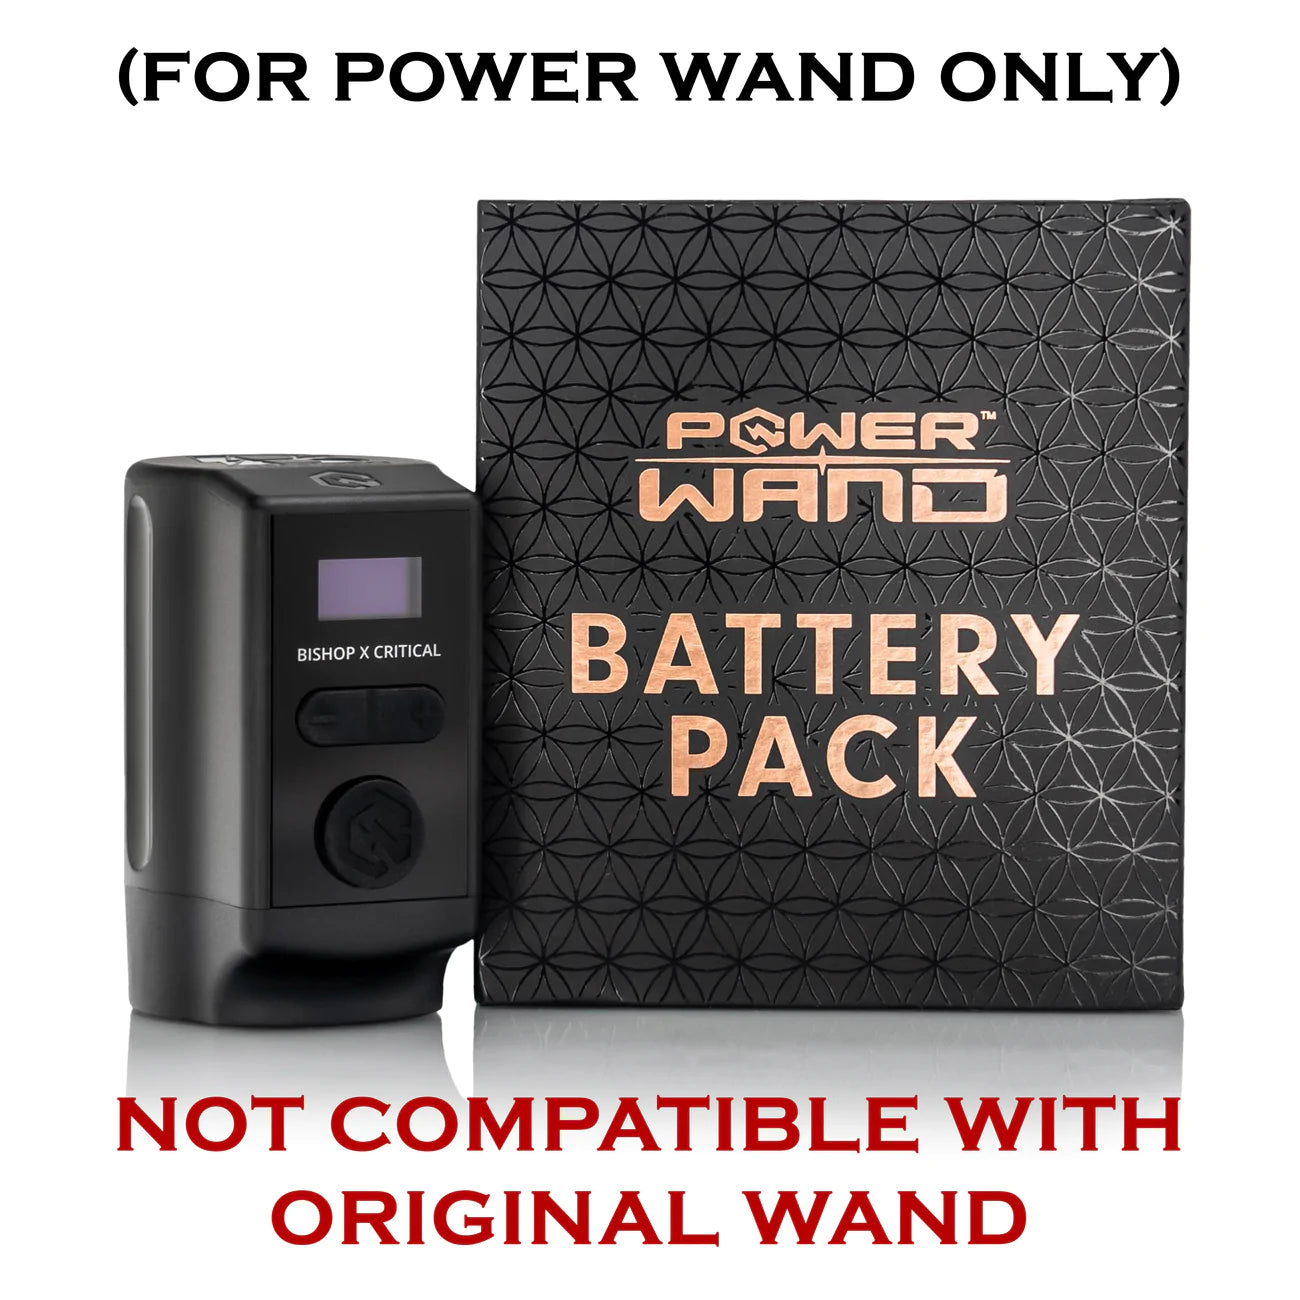 Critical x Bishop Power Wand Battery Pack